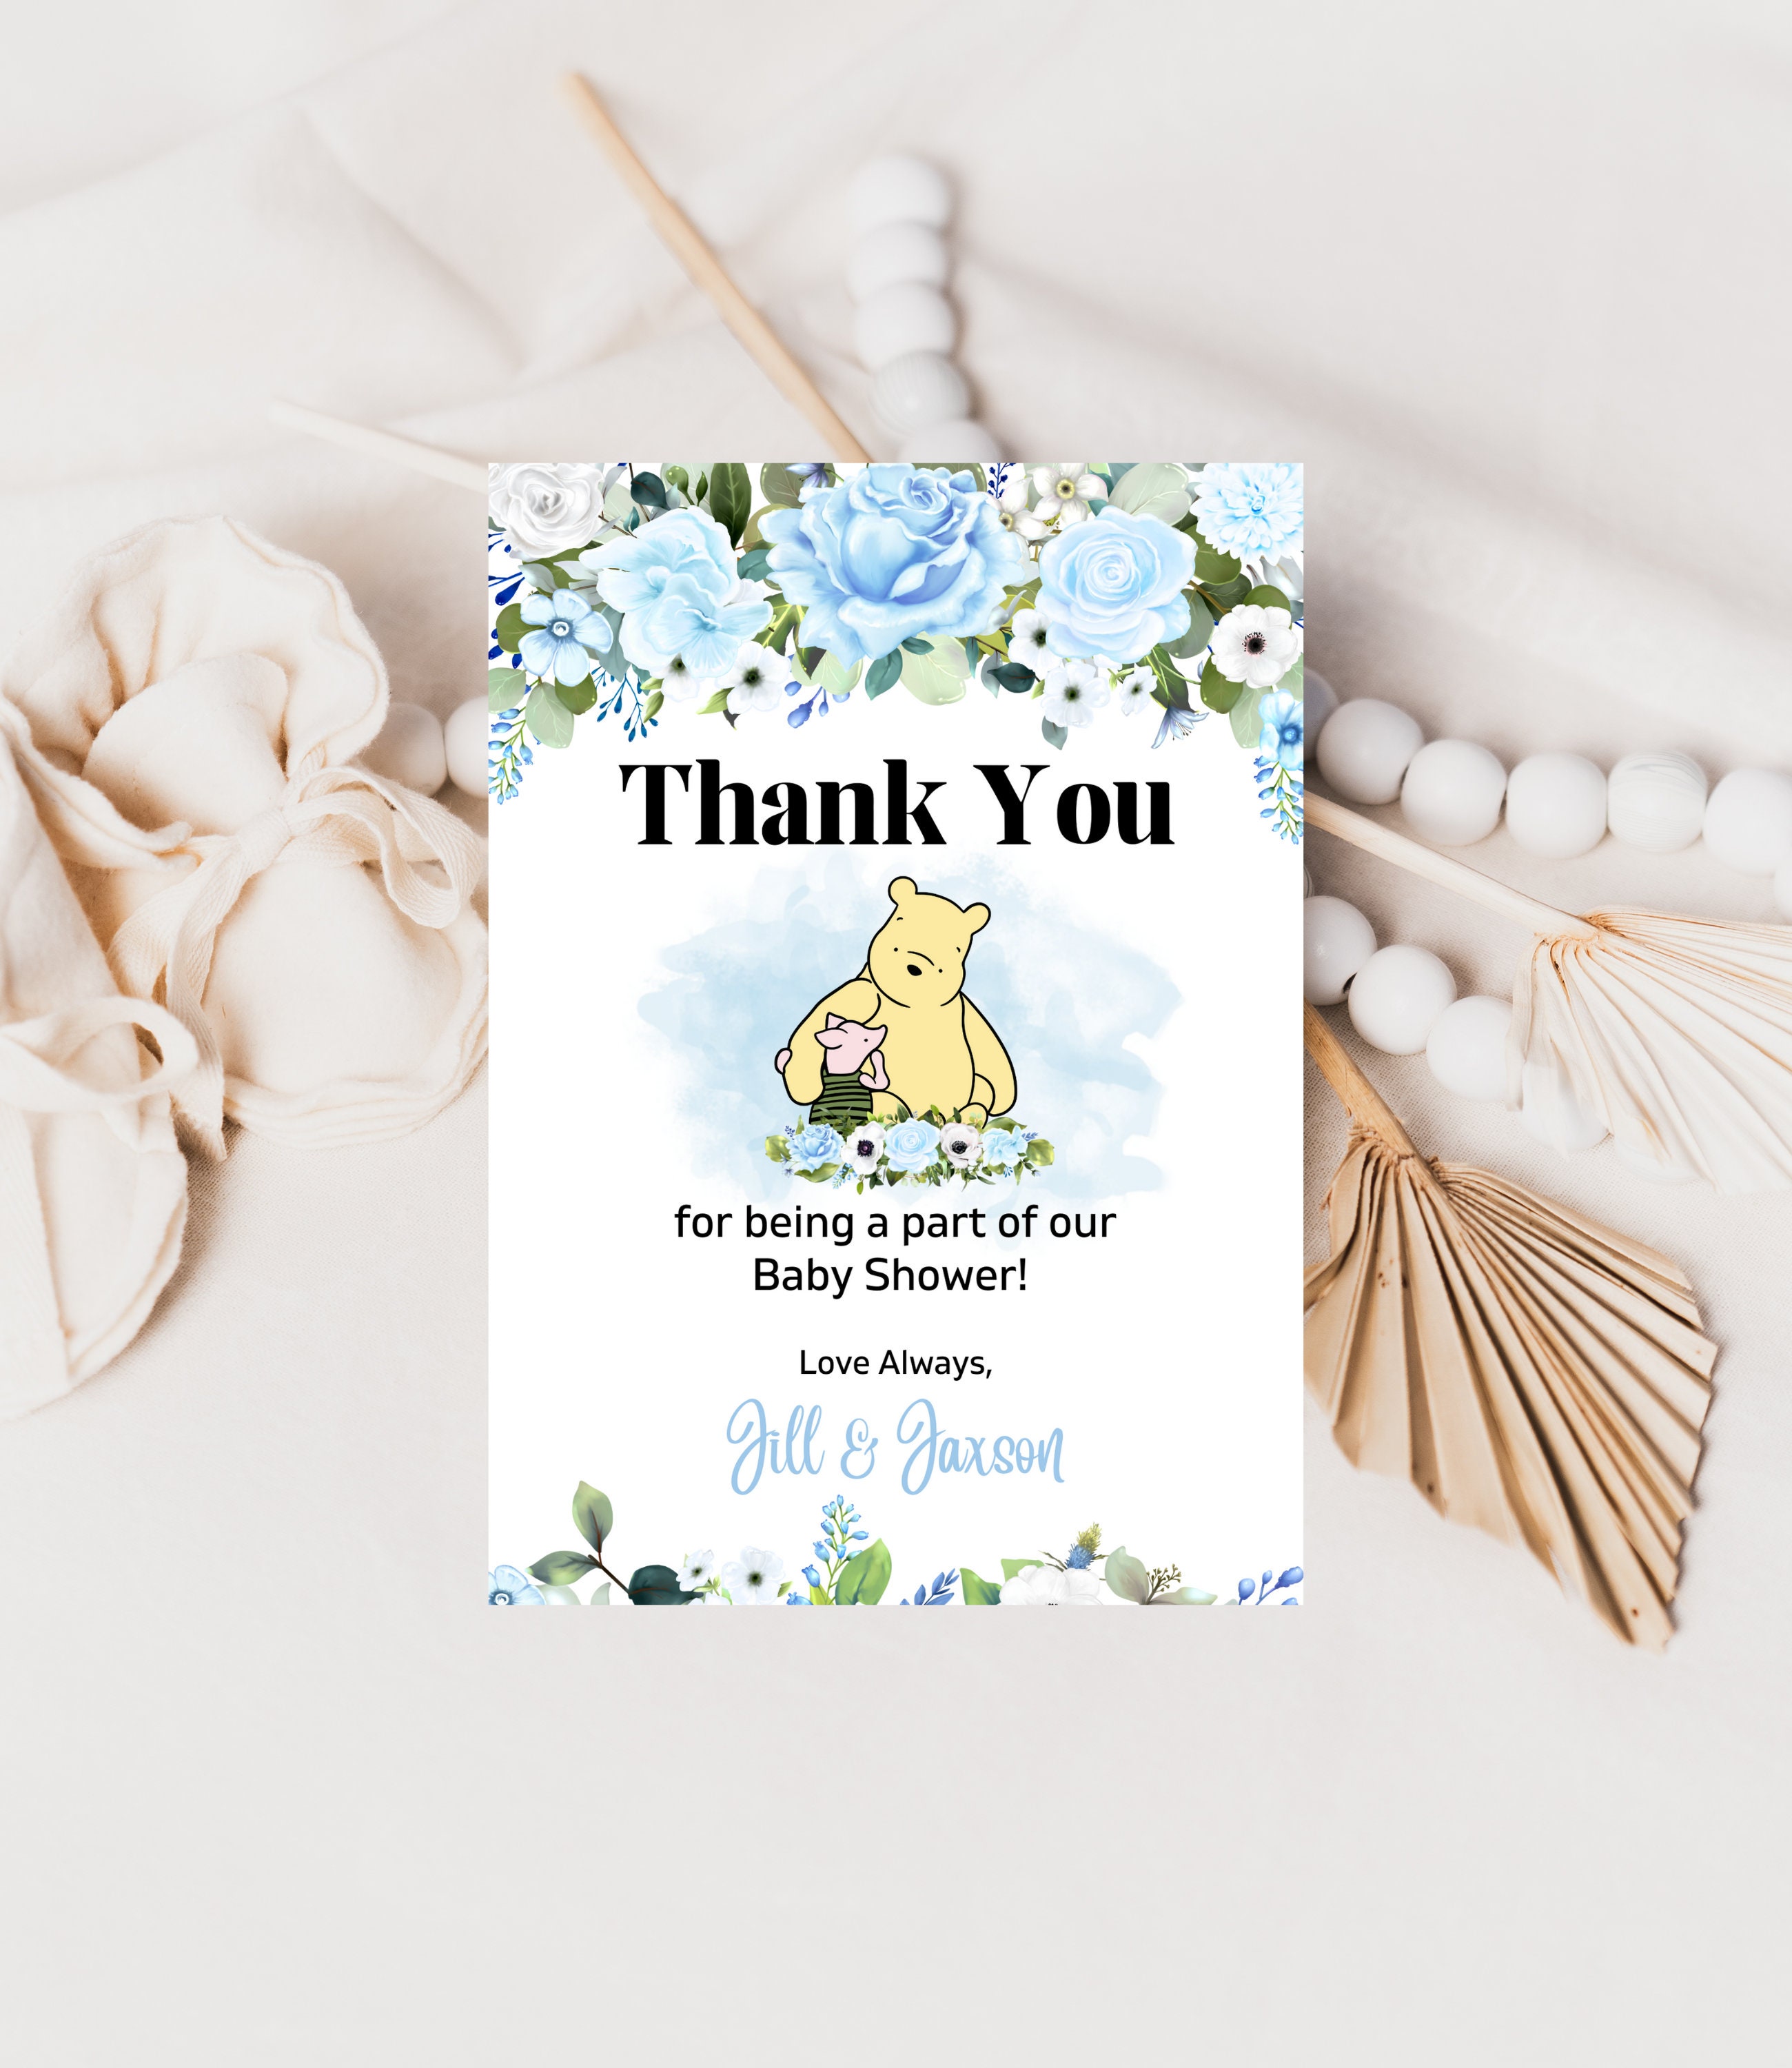 Disney Winnie The Pooh Baby Shower Personalized Name Piglet